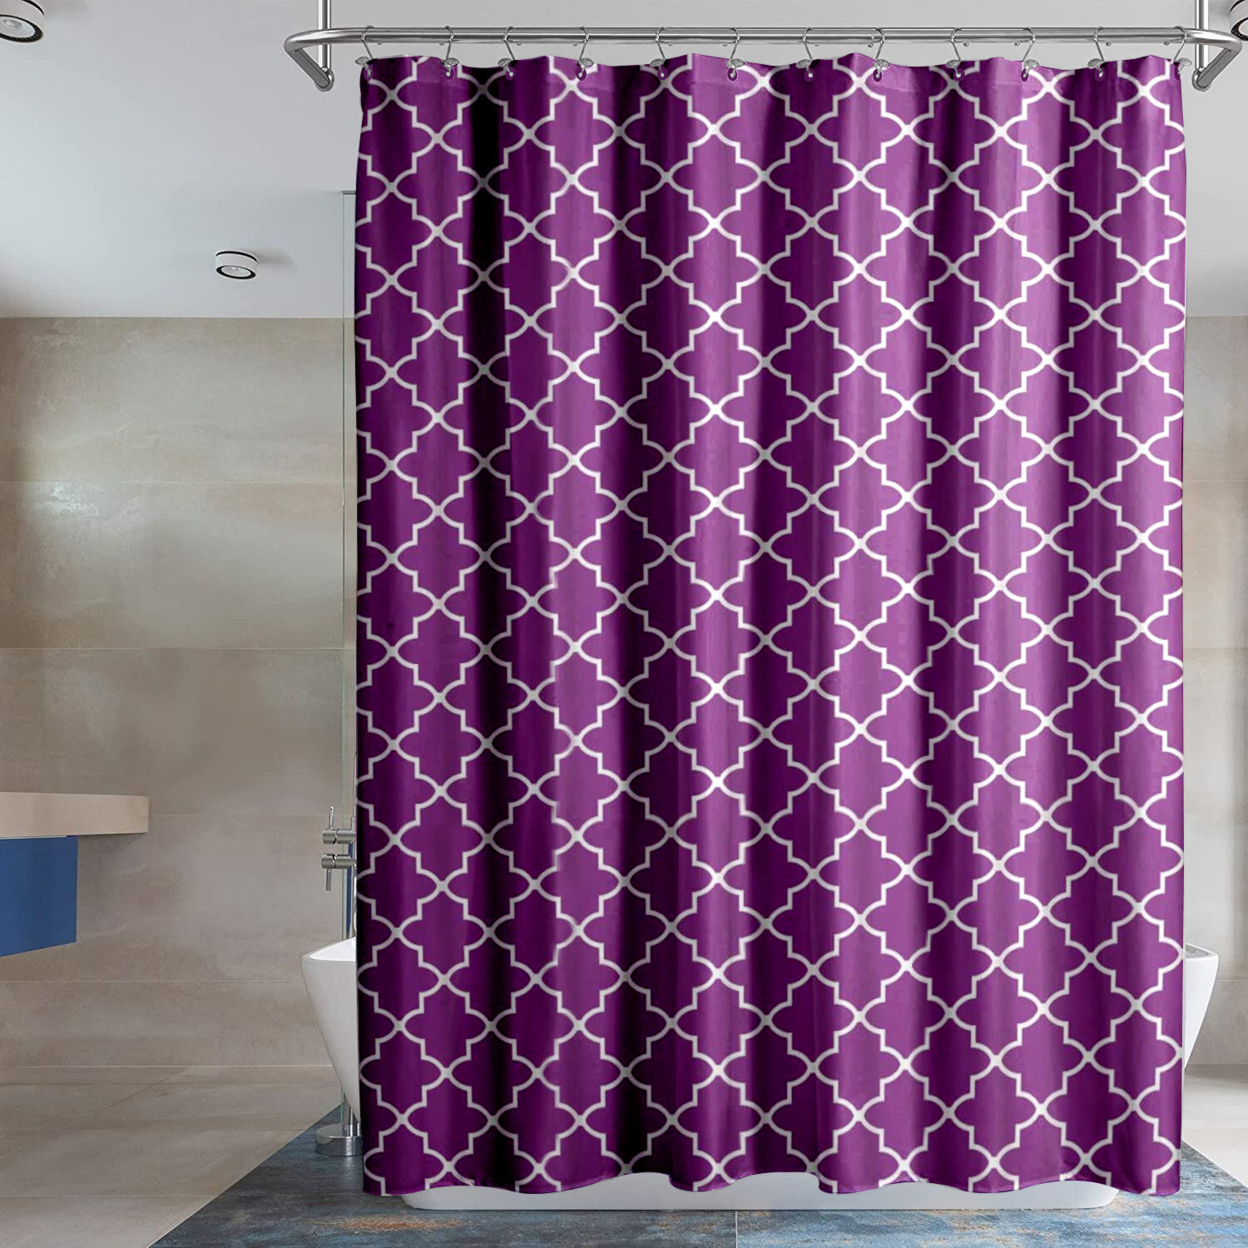 Water-Proof Printed Peva Shower Curtain - 1-Pack, Assorted